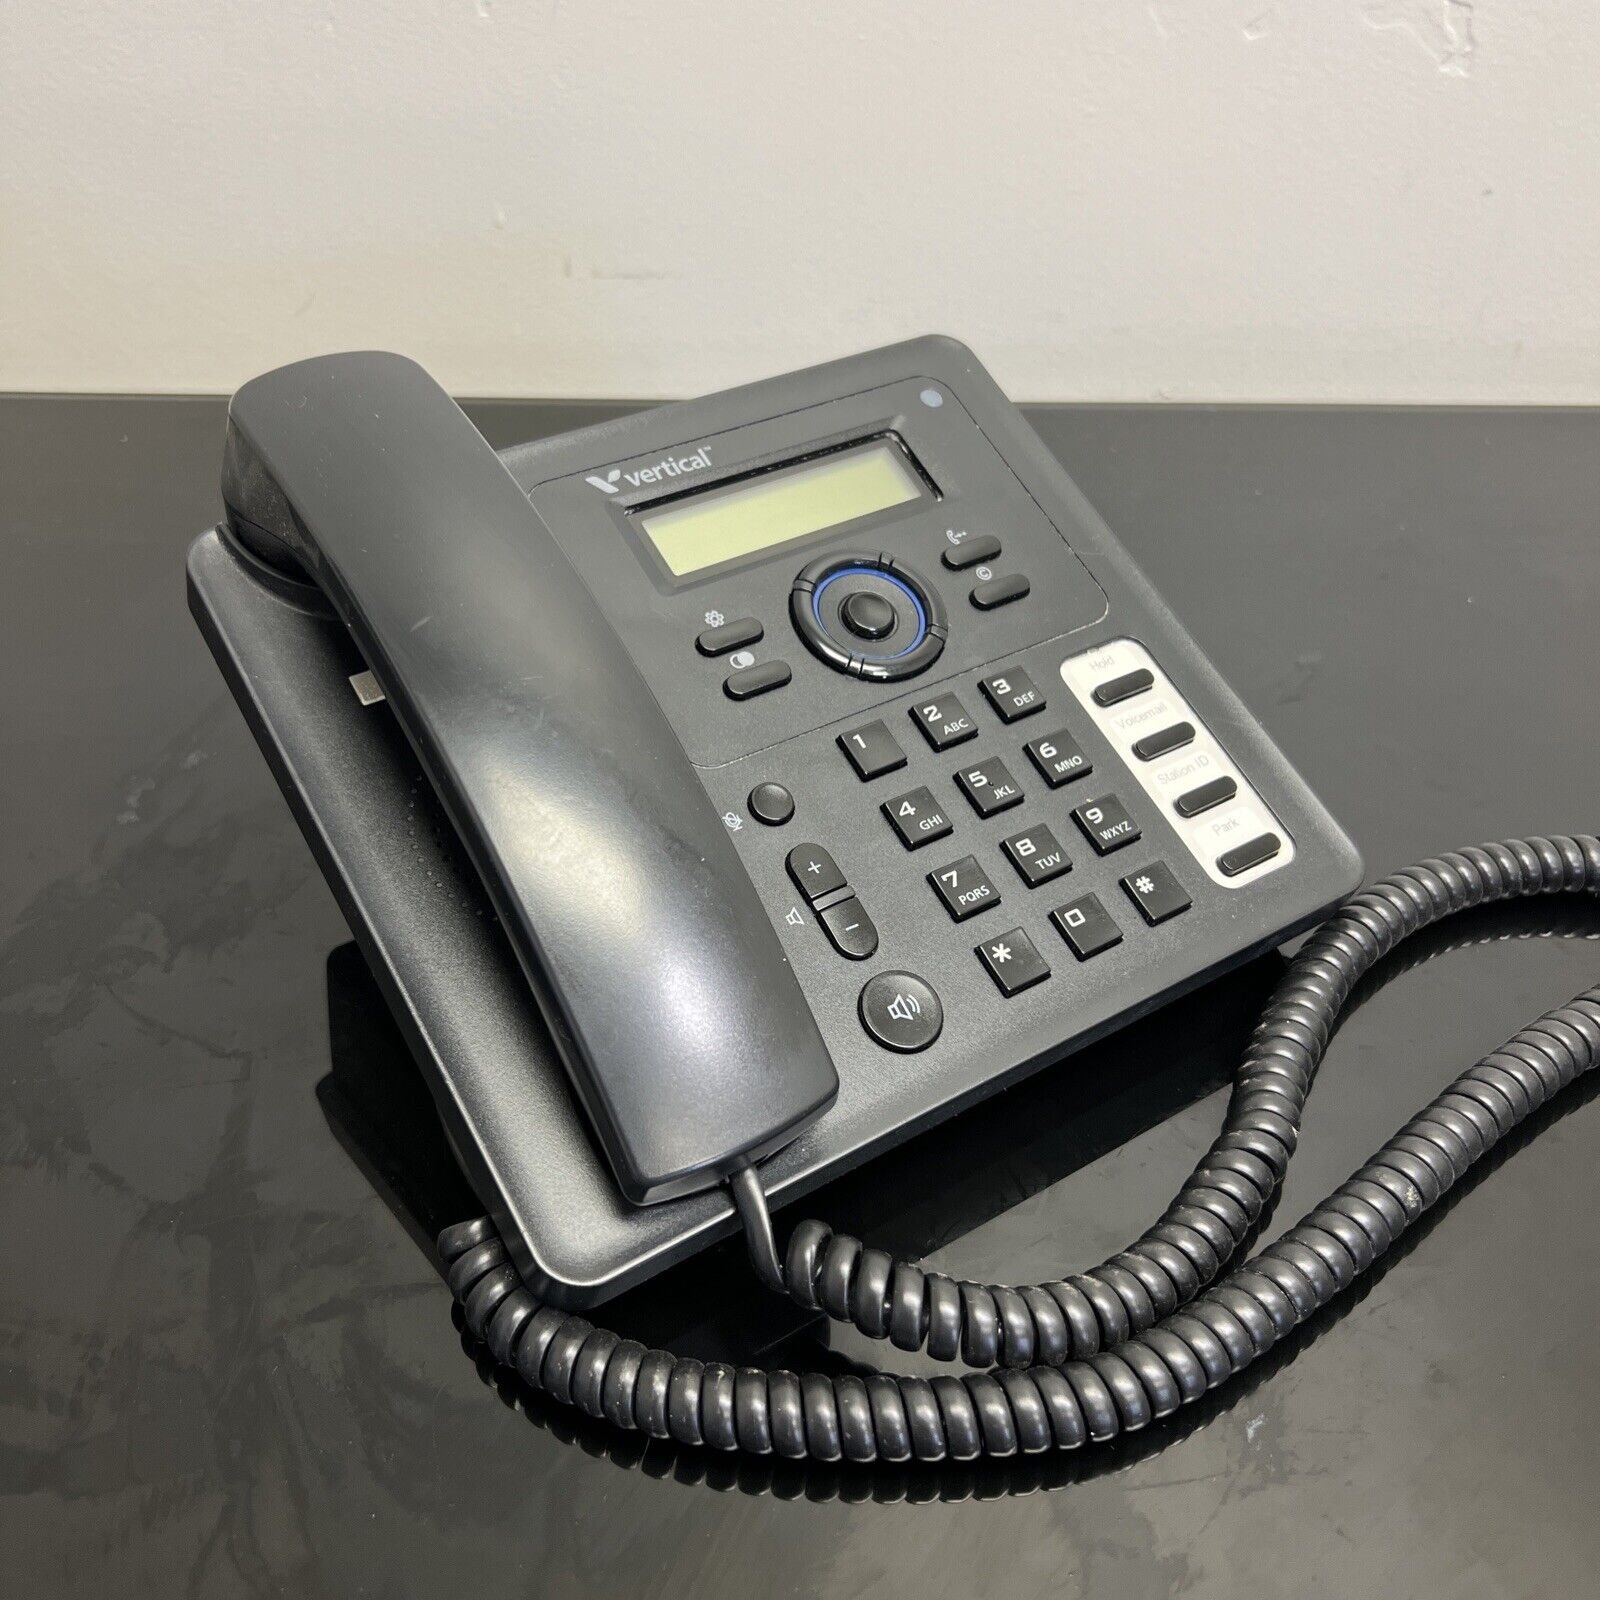 Vertical Communications VW-E5000i-4 VoIP Telephone - With Handset